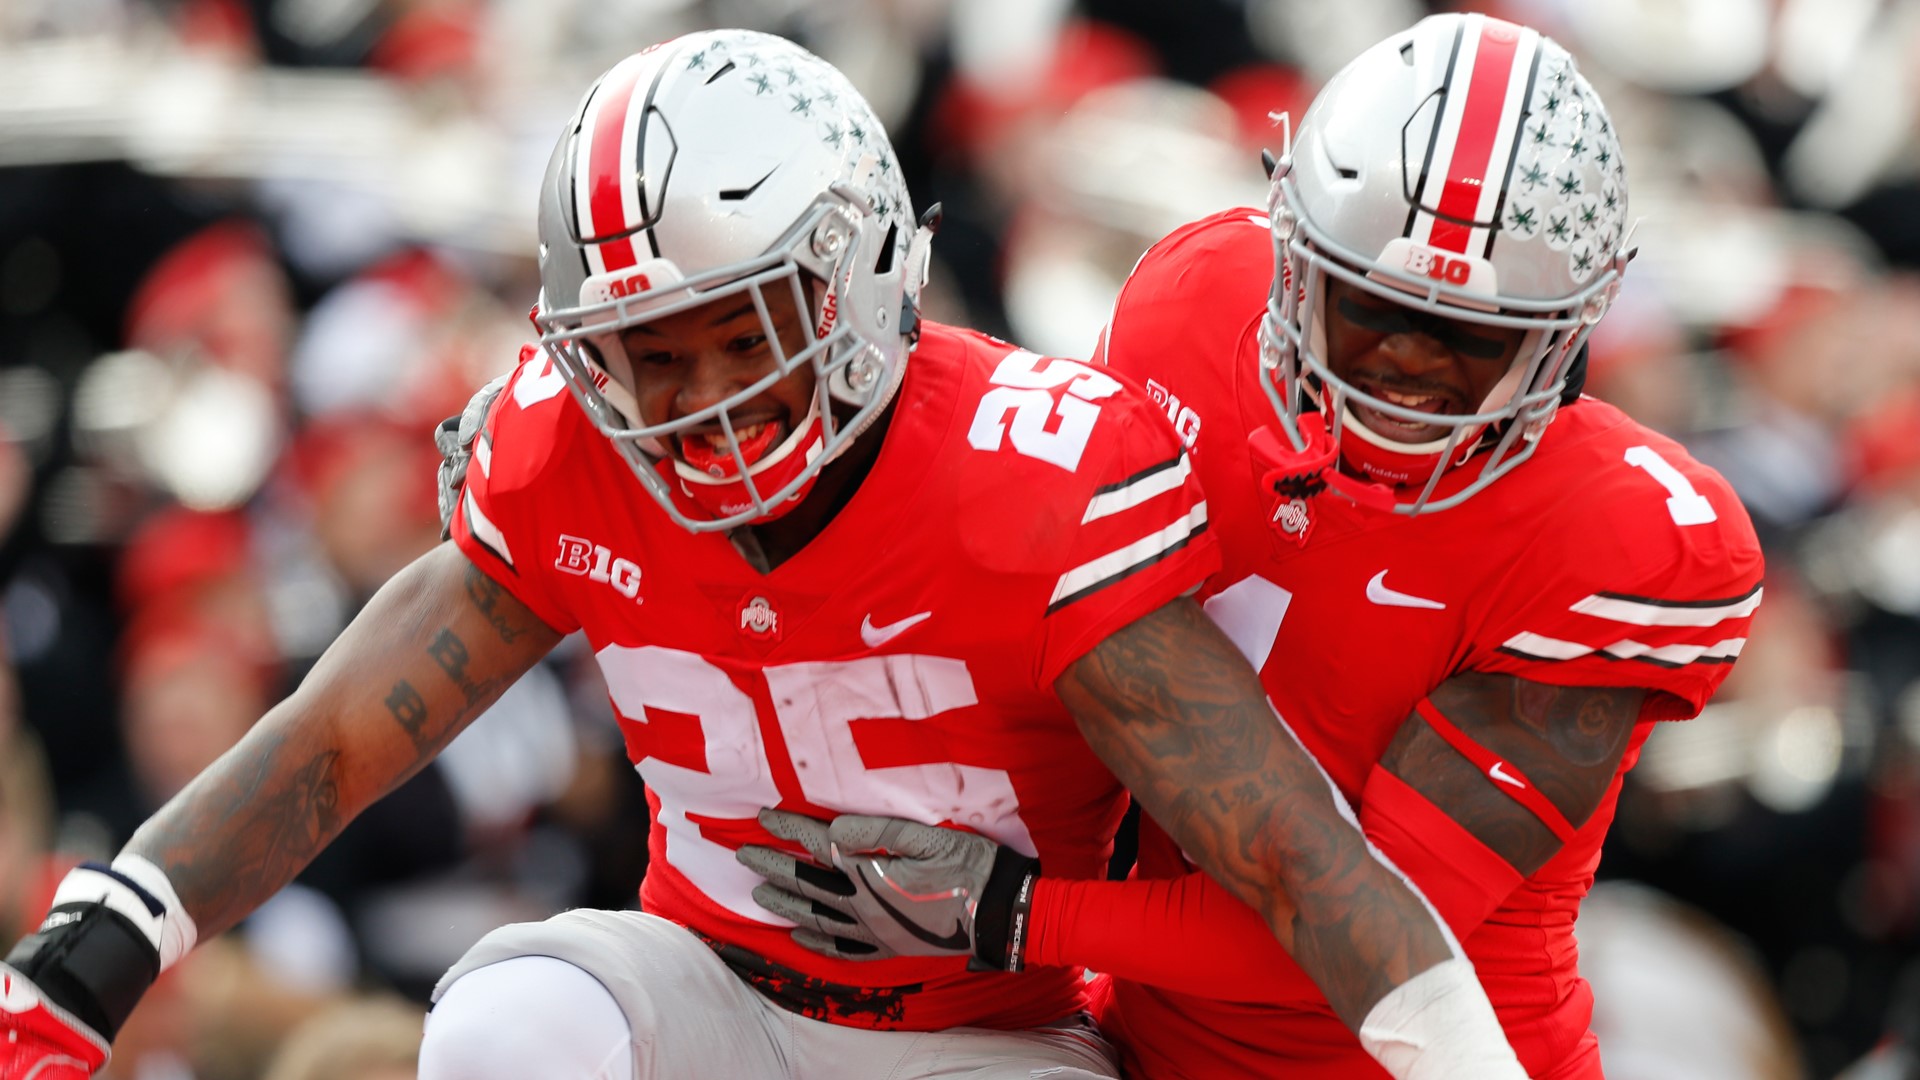 Buckeyes still loaded as most NFLeligible players stay put